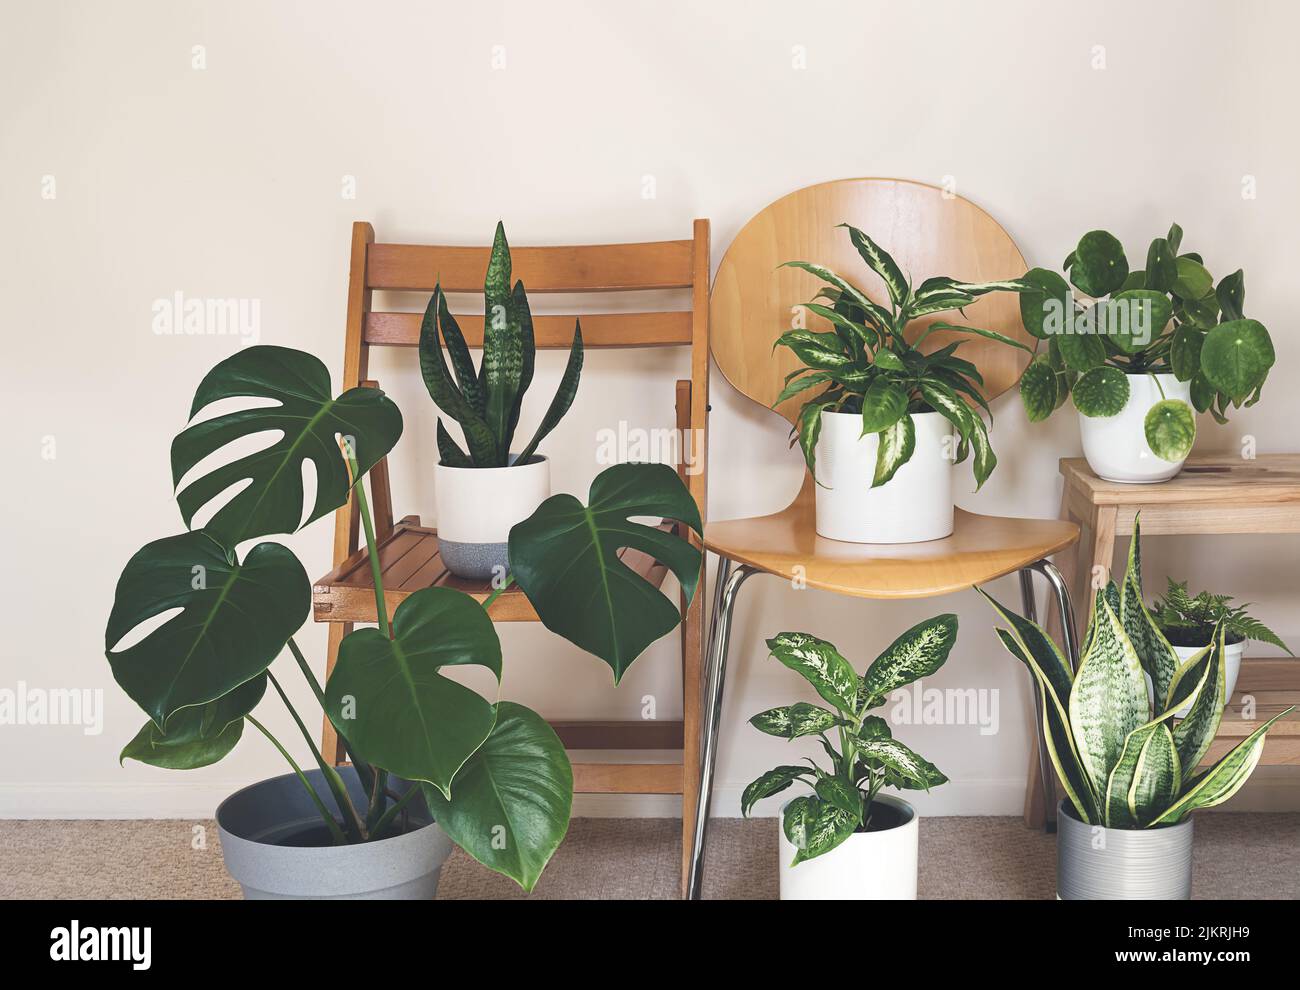 A variete of home plants: monstera, dieffenbachia, sansevieria, pilea on the chairs in the room, indoor garden concept Stock Photo